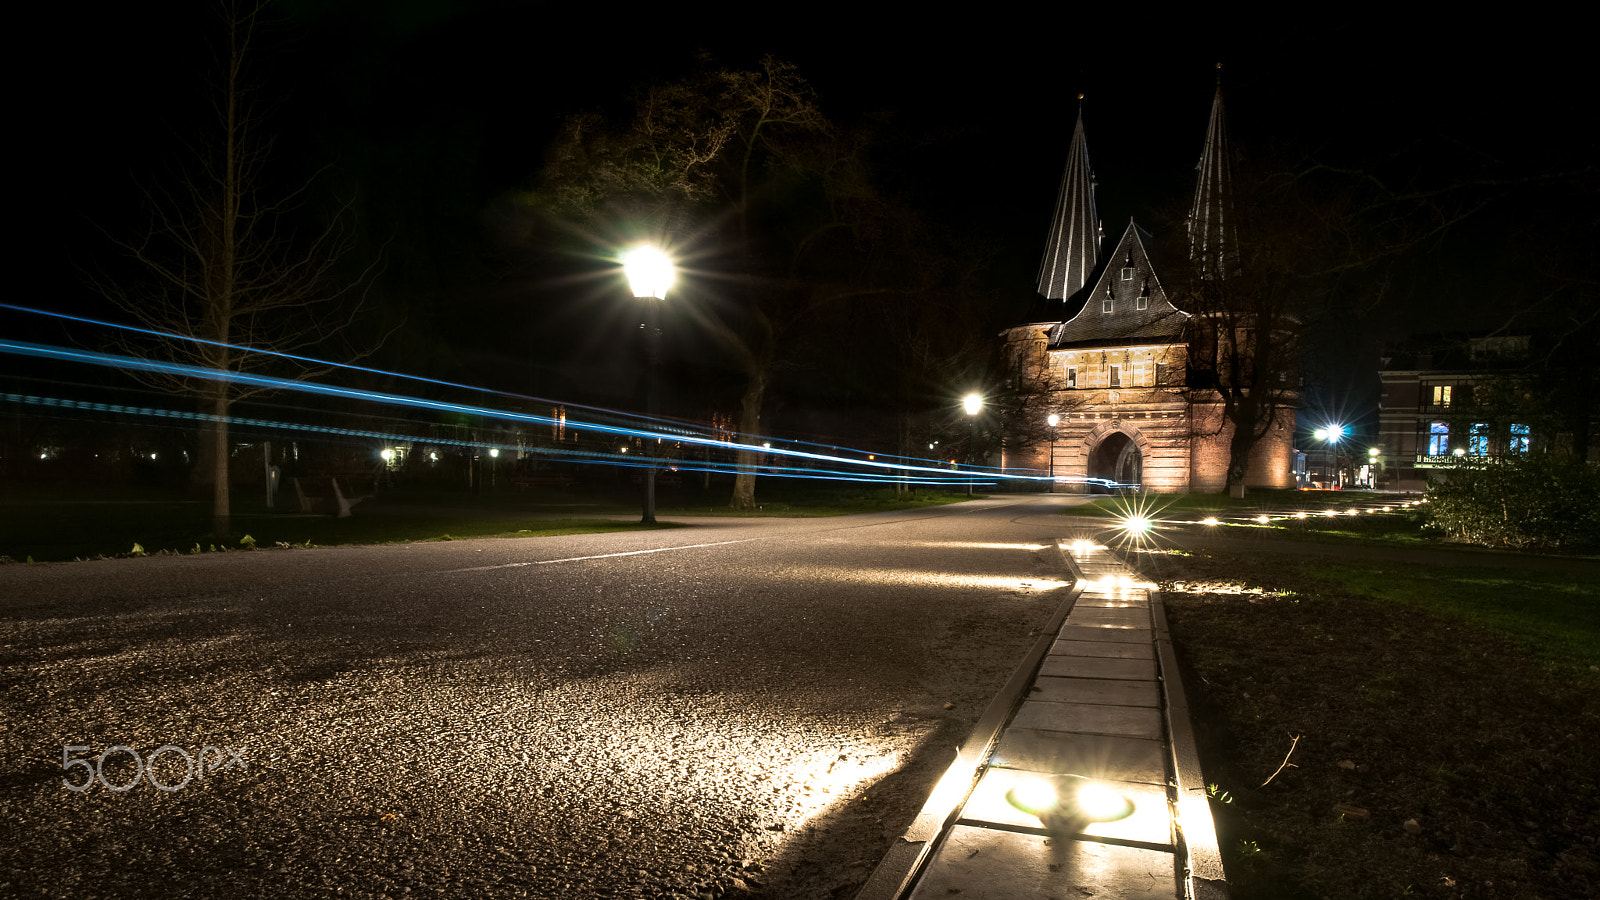 Sony Alpha DSLR-A900 sample photo. Atmospheric night photo of the old city gate cellebroederspoort photography